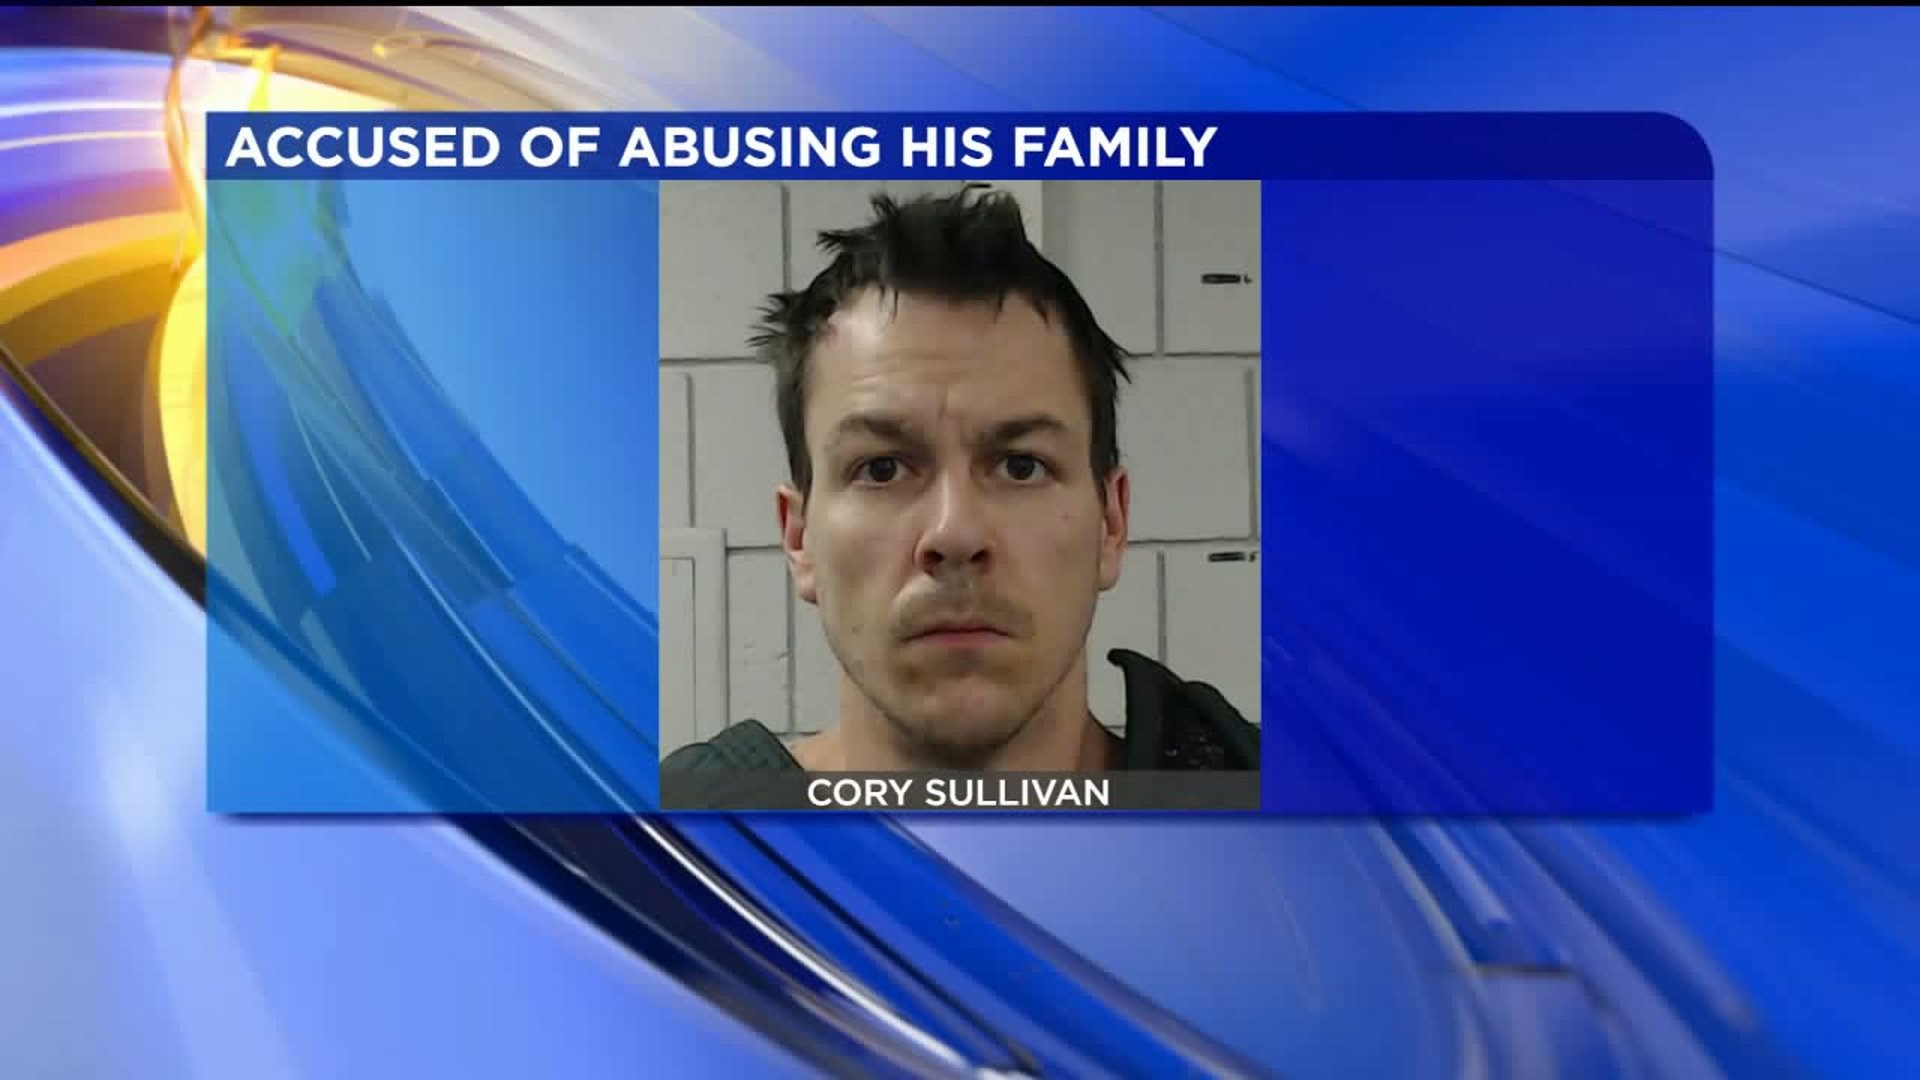 Man Locked Up for Allegedly Abusing Family